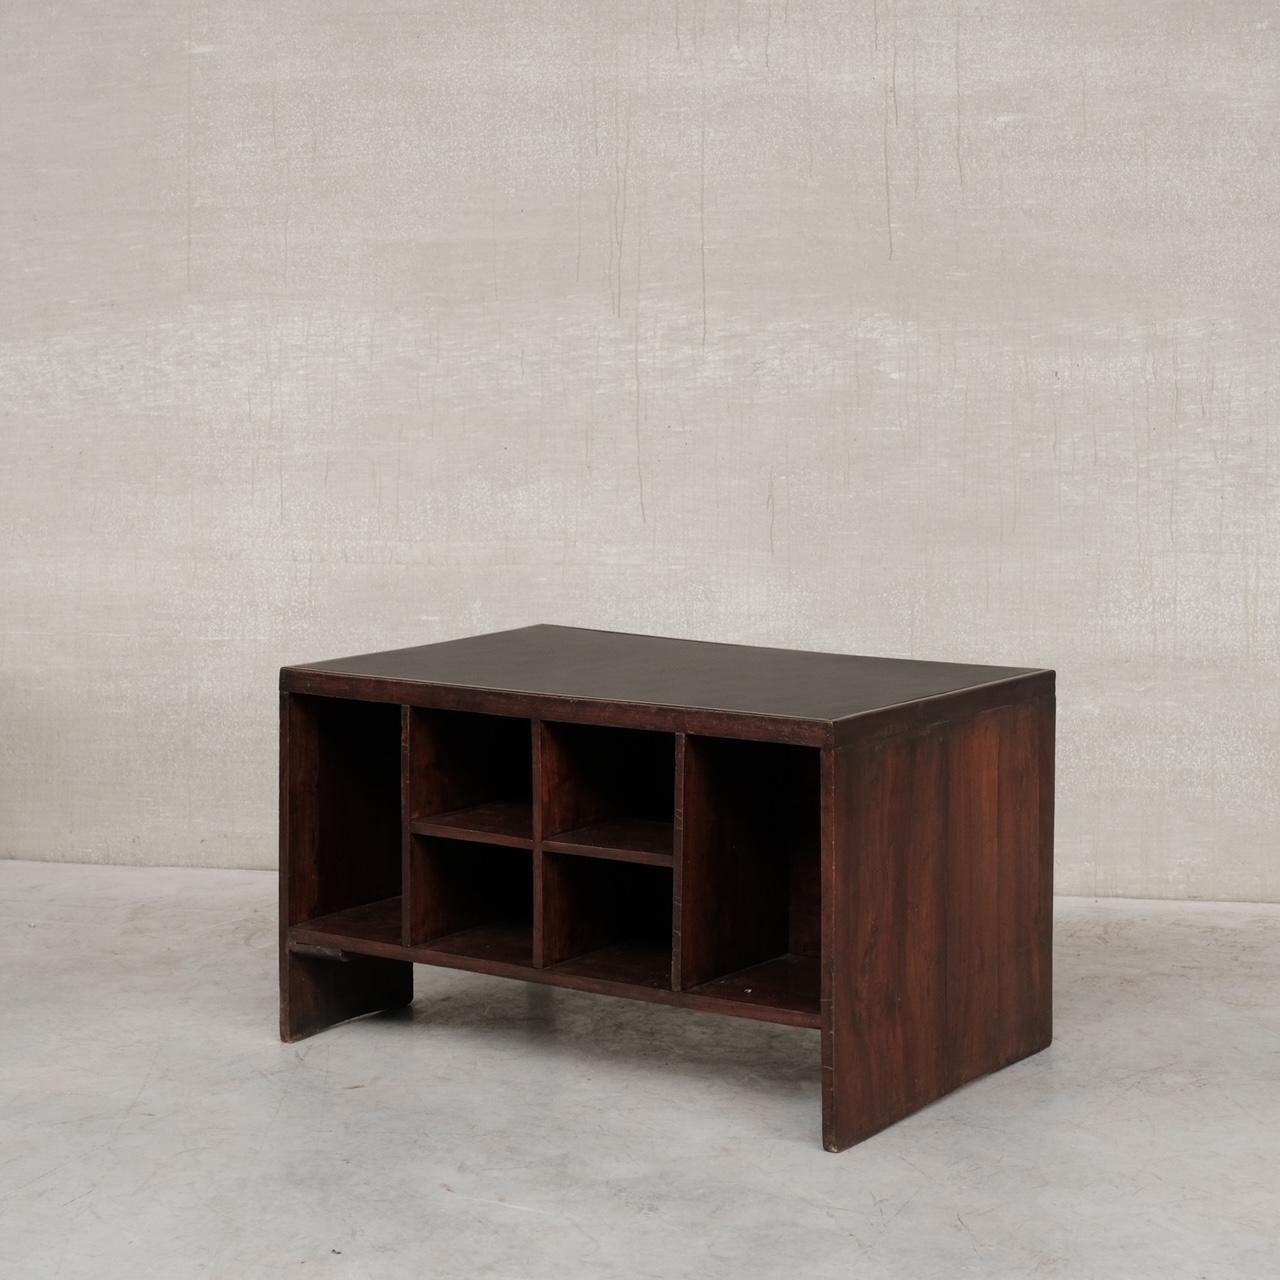 An increasingly scarce teak mid-century desk by legendary design Pierre Jeanneret. 

India, circa 1960s, for Chandigarh projects. 

Designed for various administrative buildings in the city. 

Black re-covered leather top. A single drawer to